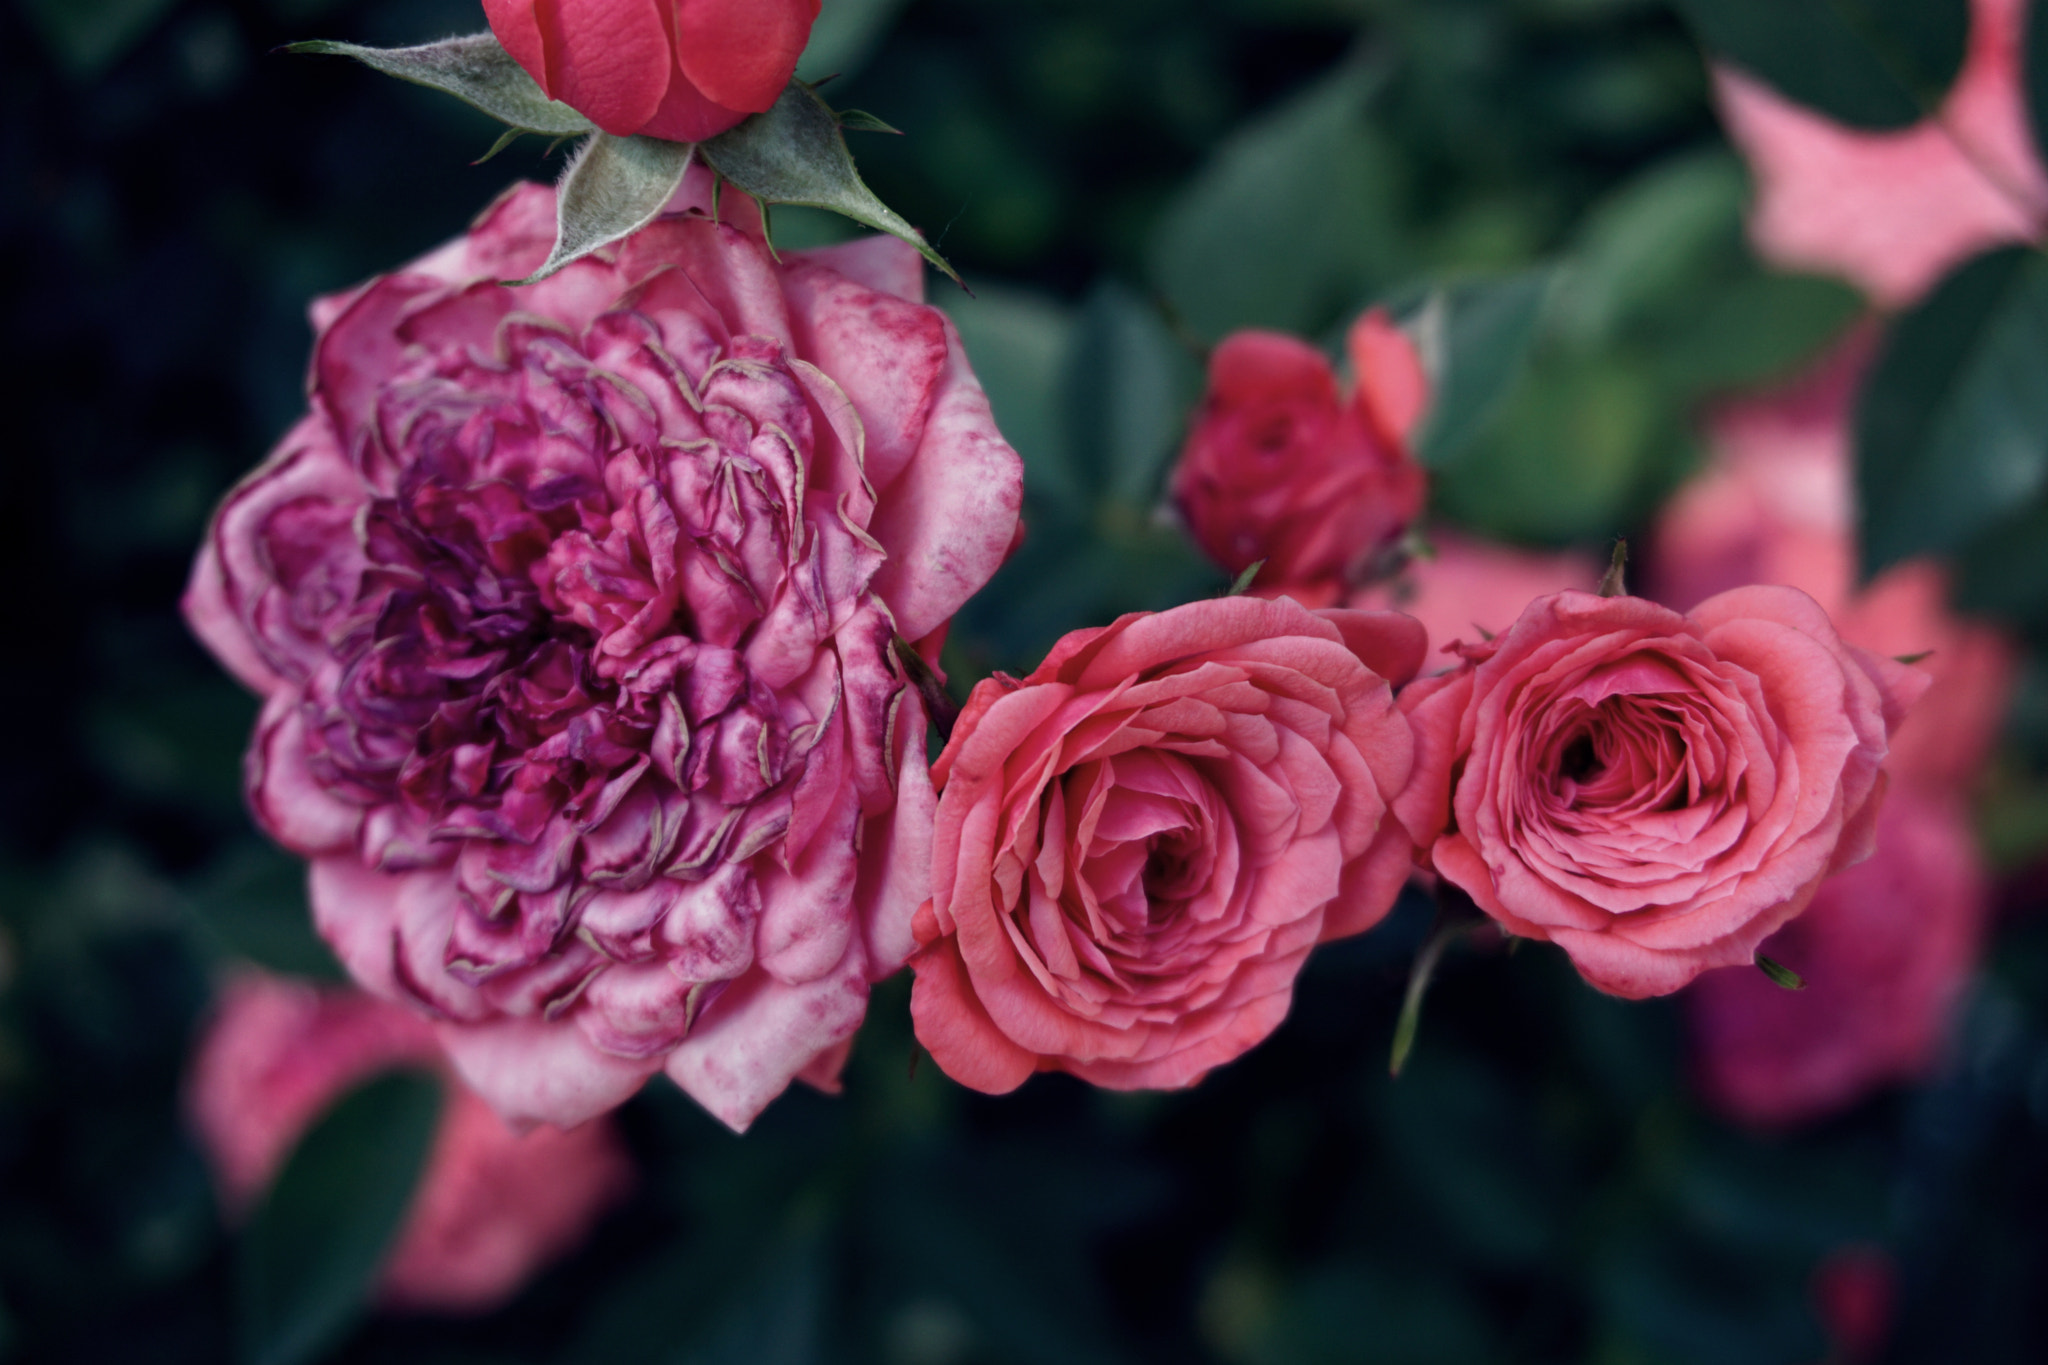 Sony a6000 sample photo. Pink roses photography